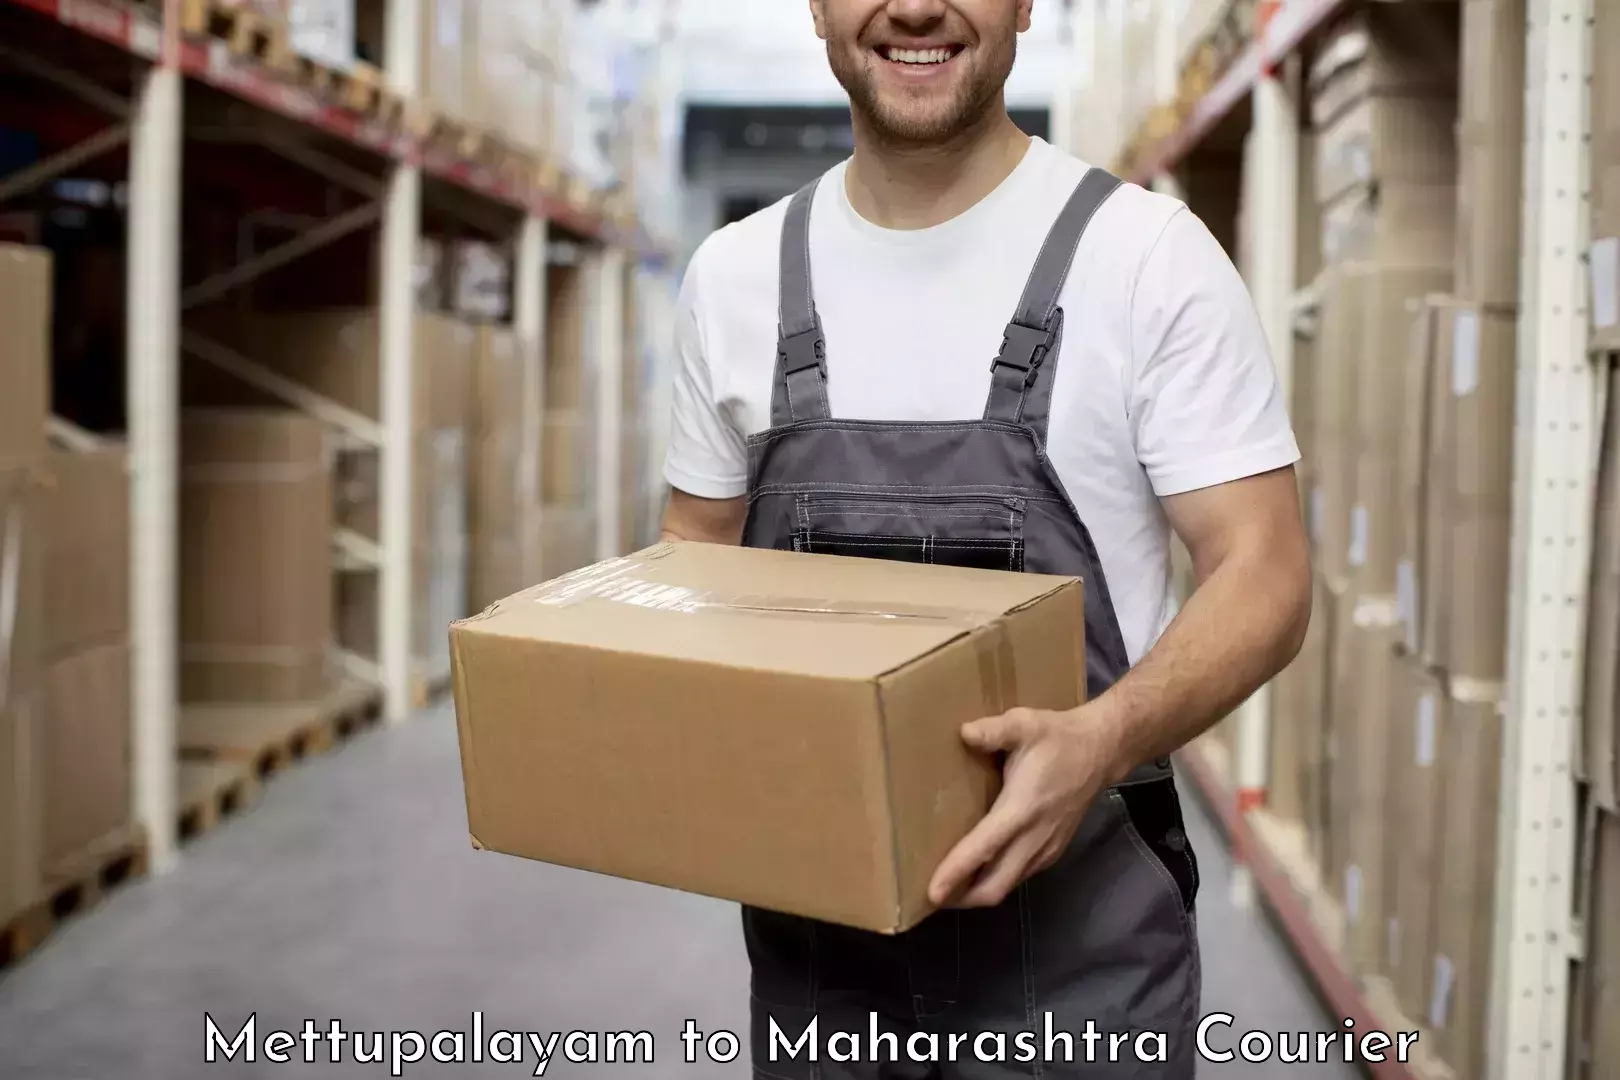 Global parcel delivery Mettupalayam to Andheri